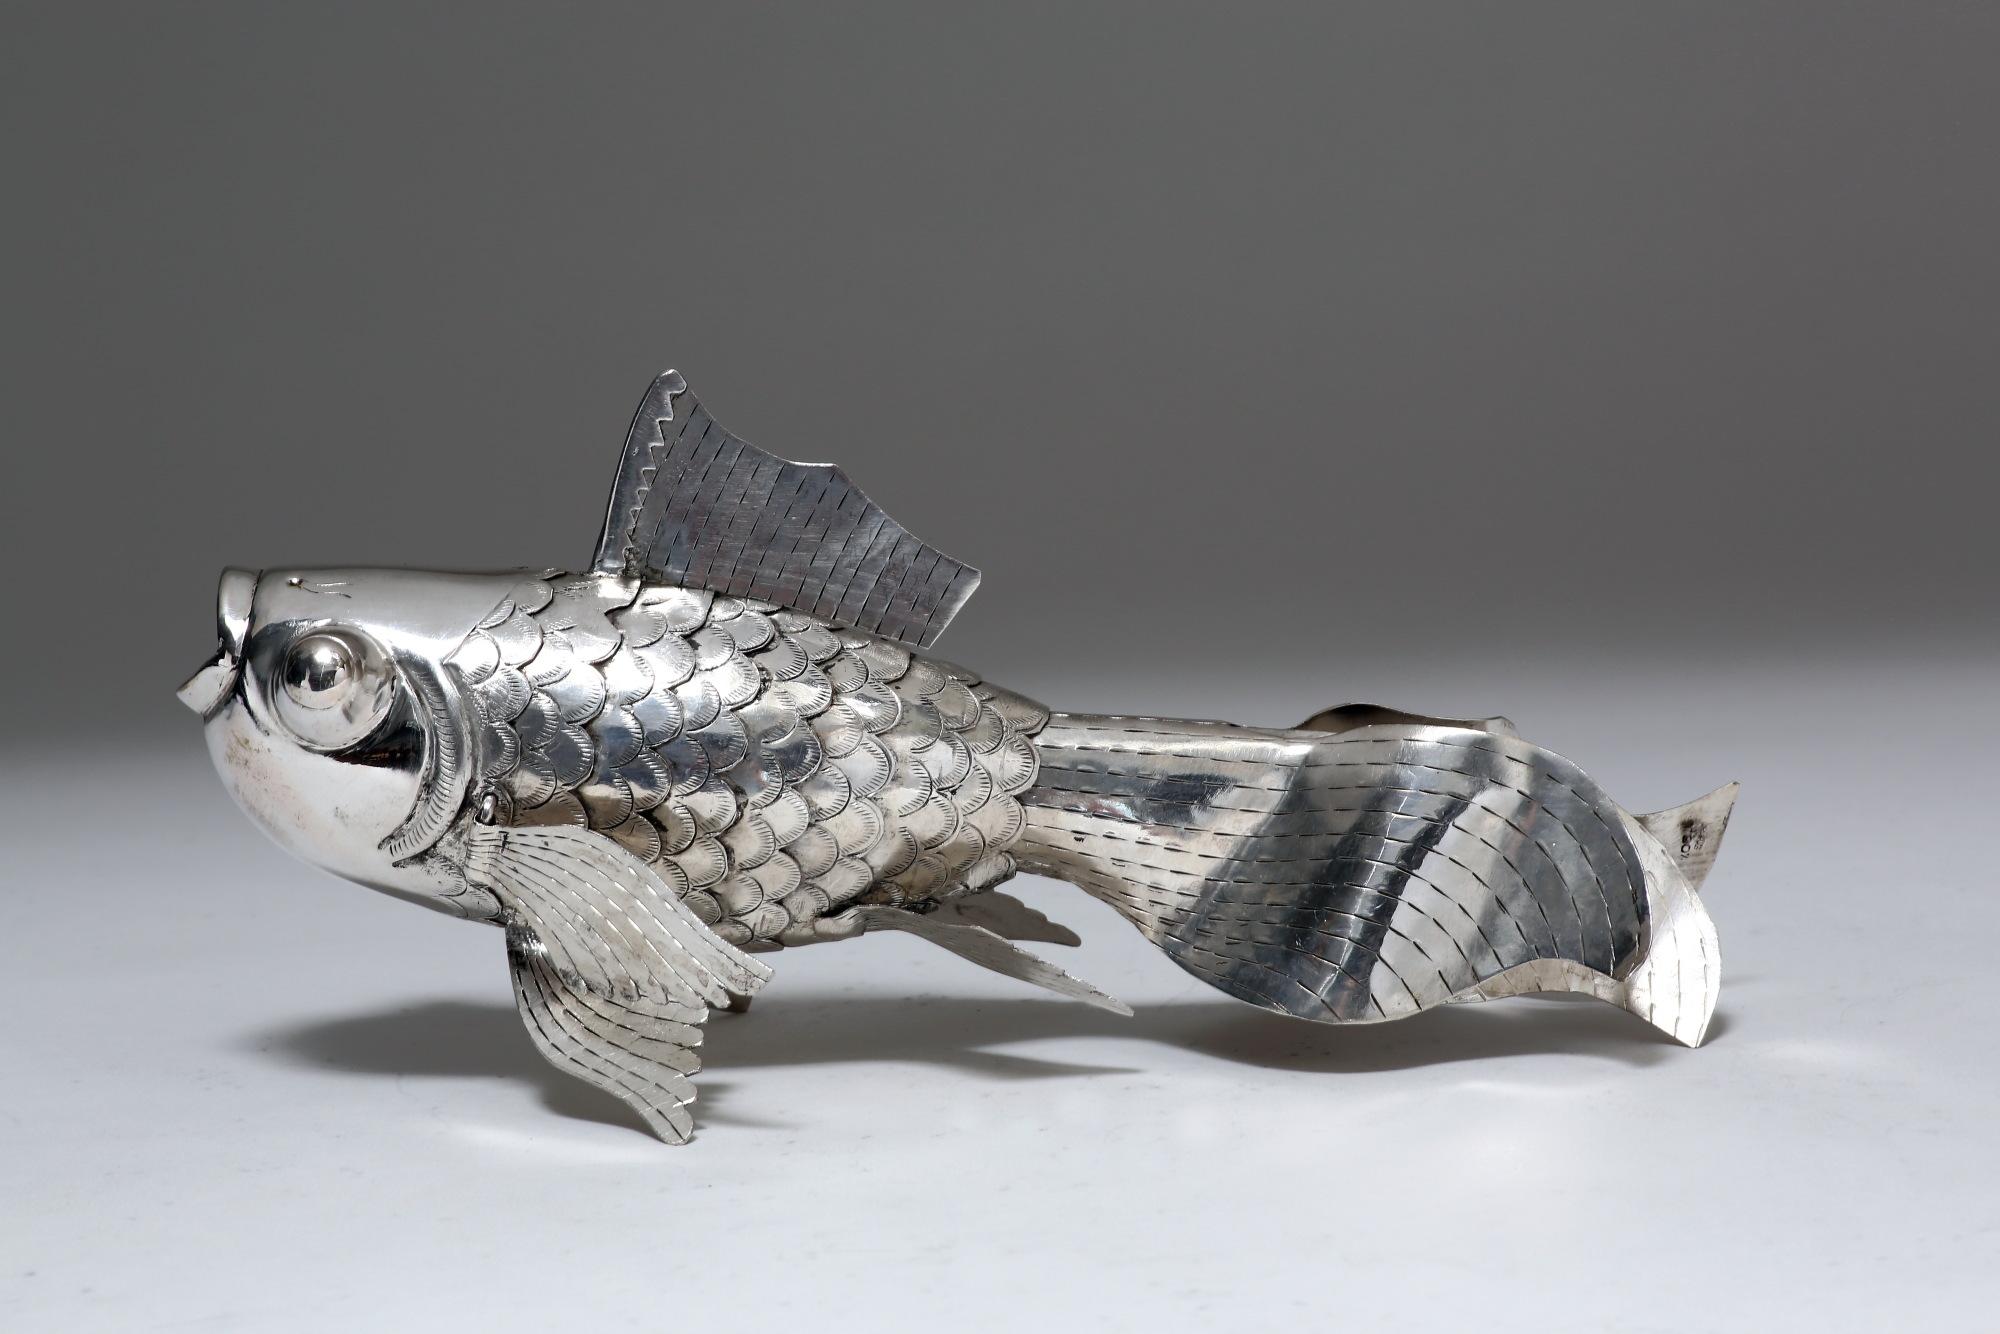 The contemporary solid silver goldfish is handcrafted by experienced silversmiths with Fine techniques. Every detail is vividly presented with extreme artisan skills. 
A pair is available.
90% Silver
Size: 8 3/4